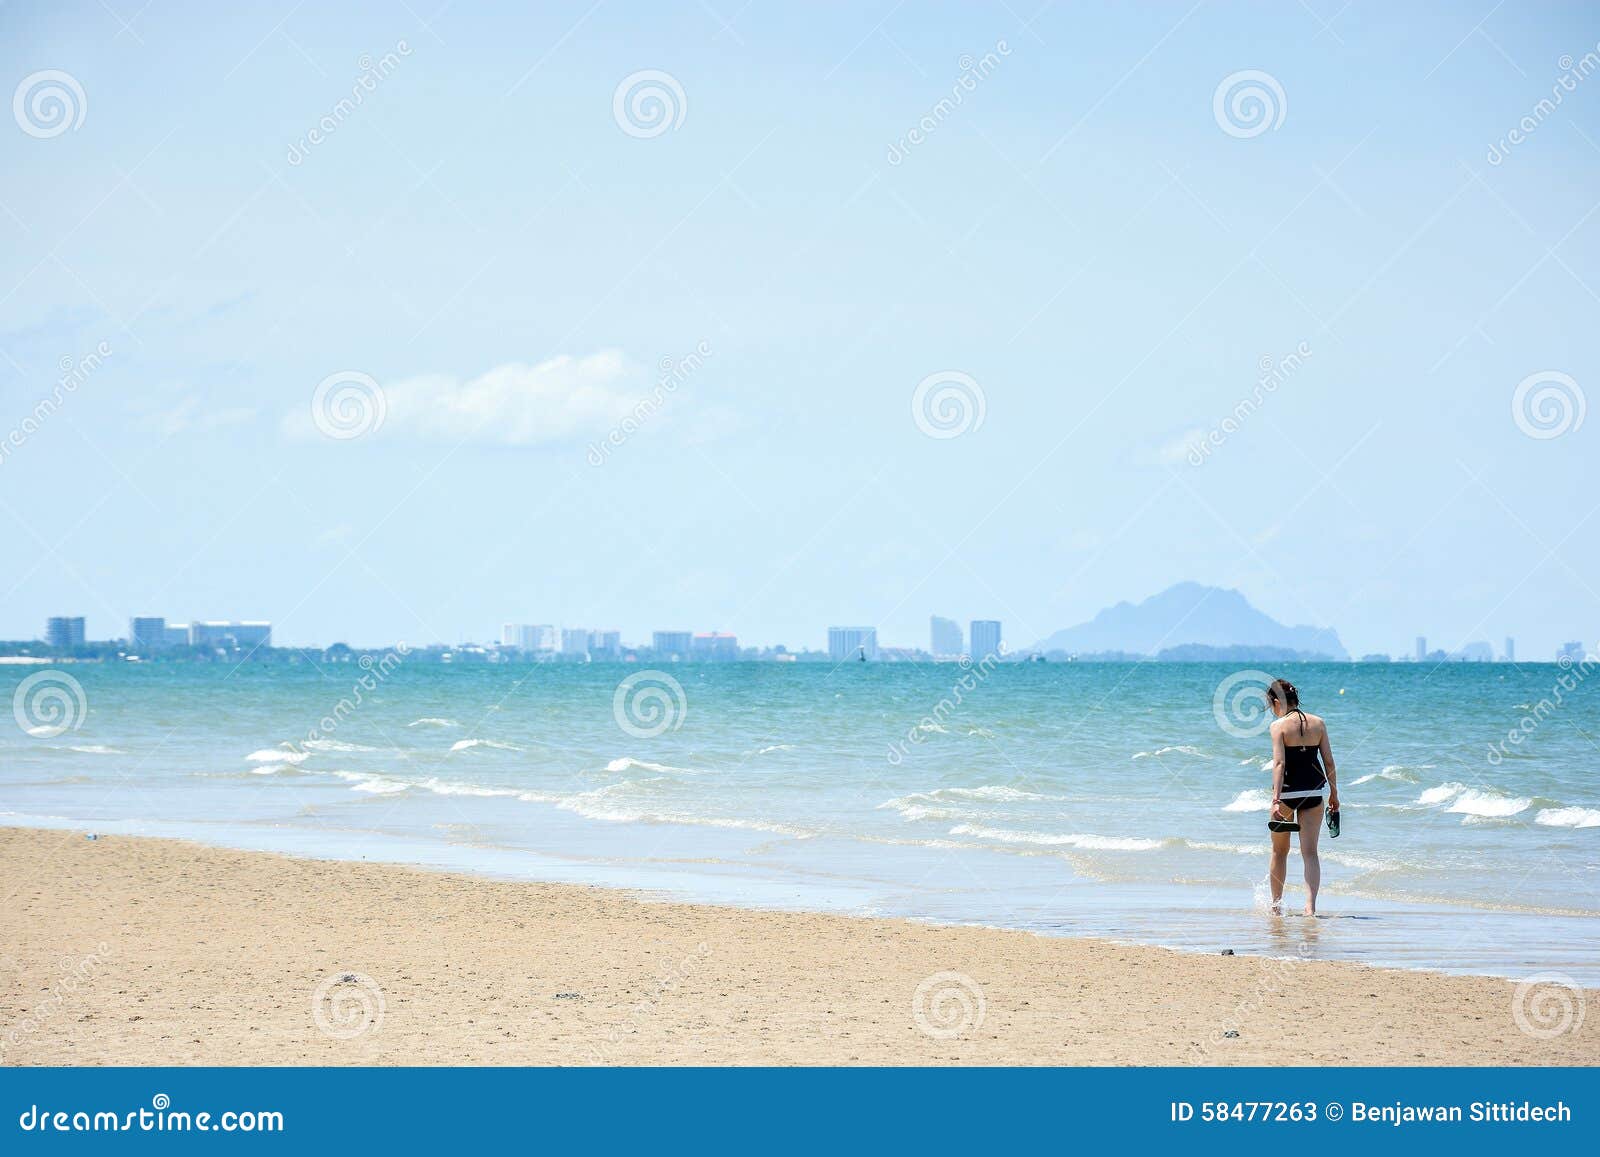 Woman walk on the beach editorial stock photo. Image of blue - 58477263